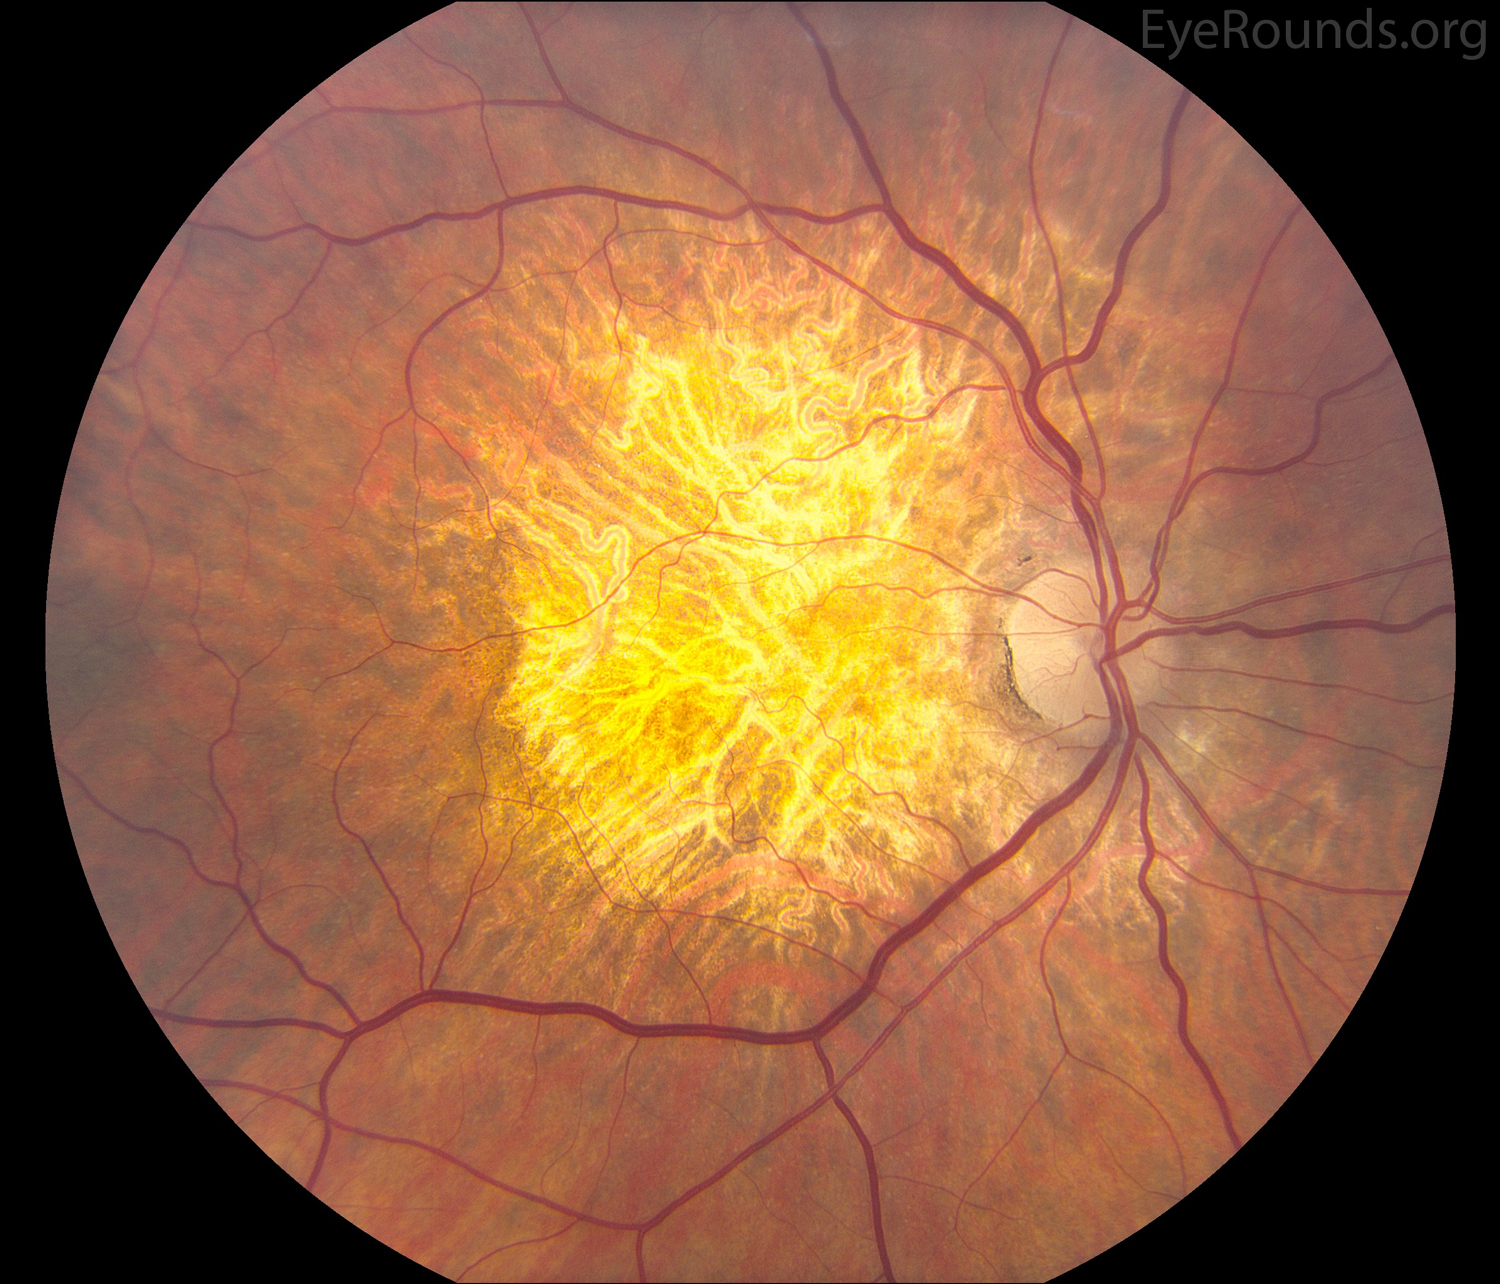 Non-exudative macular degeneration with extensive geographic atrophy